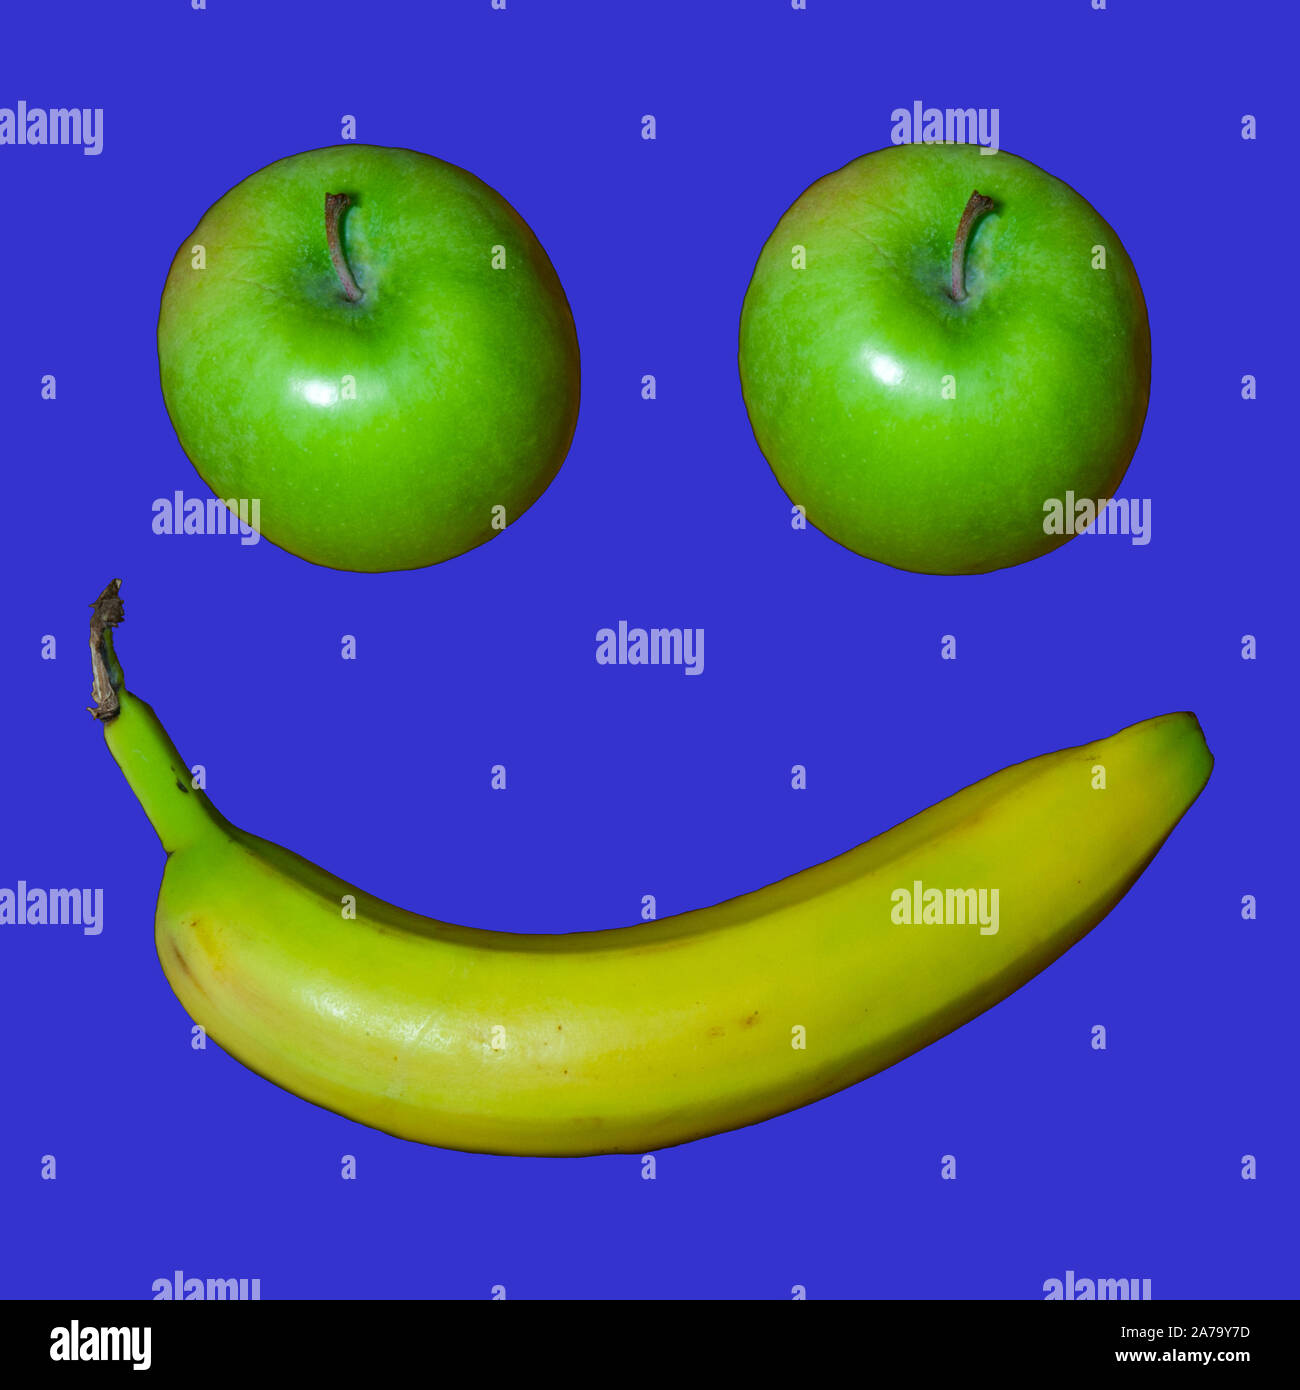 Two Granny Smith apples and a banana make a smiley face on a black background. Stock Photo